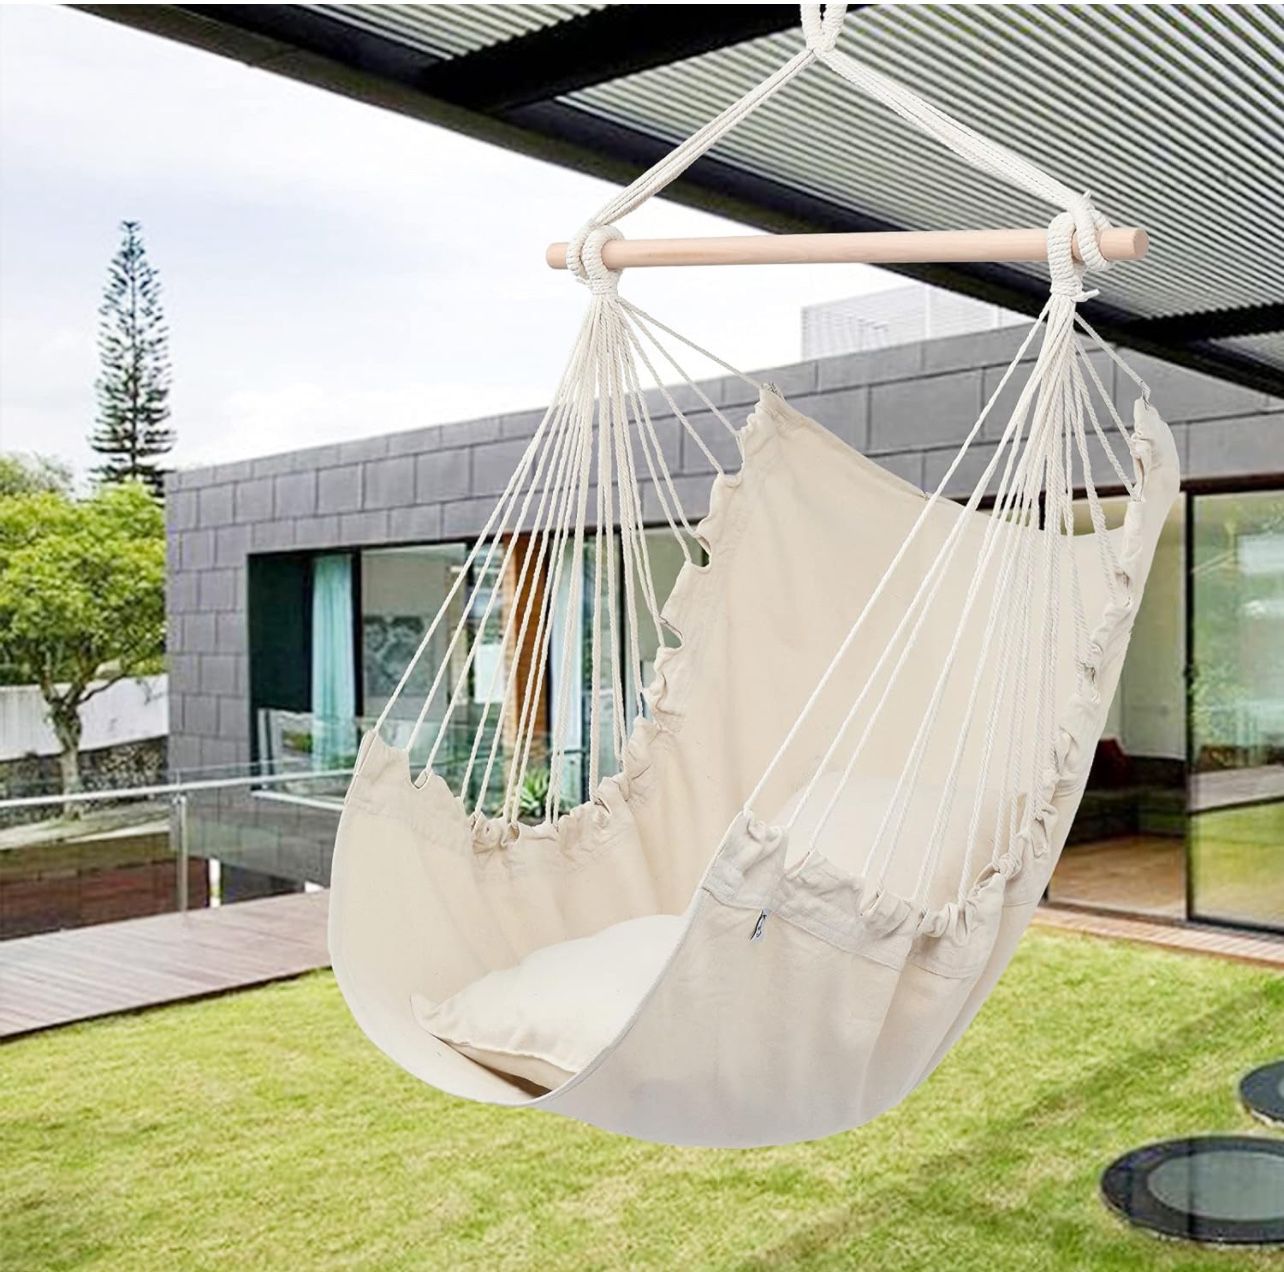 ONCLOUD Hanging Rope Hammock Chair Swing Seat for Yard, Bedroom, Patio, Porch, Indoor/Outdoor - 2 Seat Cushions Included (Beige)